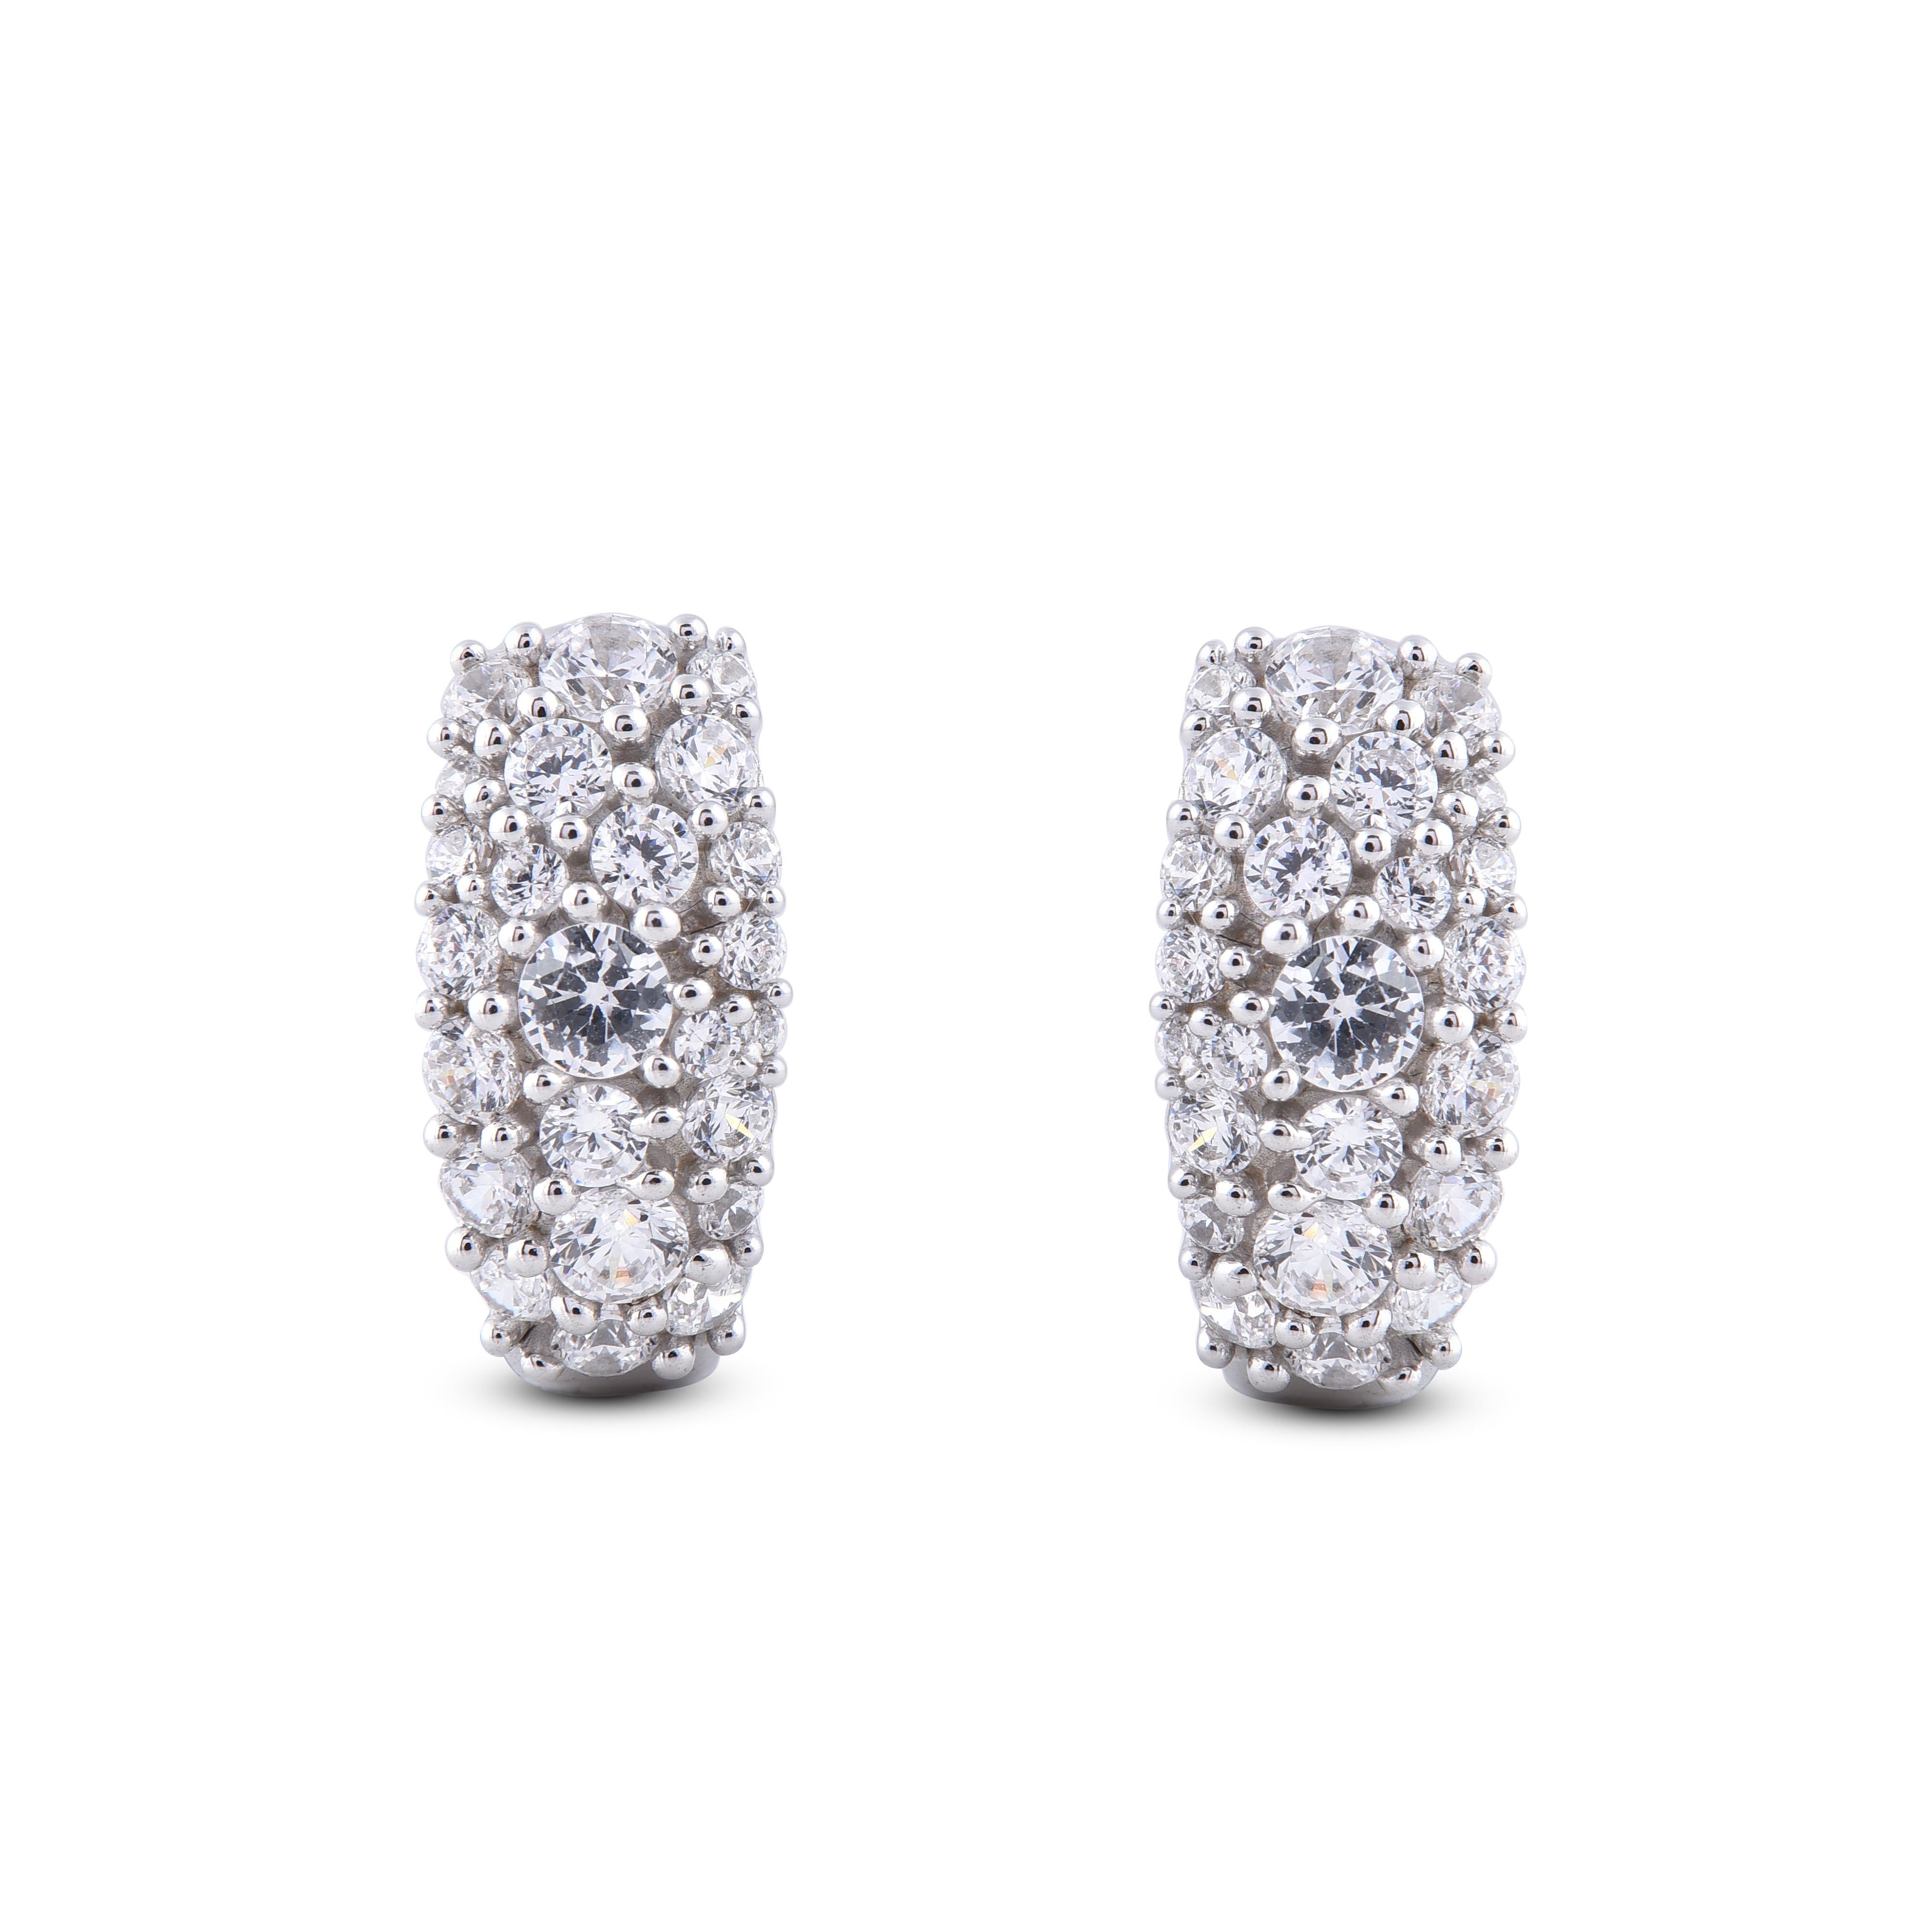 This pair of huggie hoop earrings is a truly elegant choice. This glamorous pair is made with 14 Karat white gold with modern glamour look. Carfted in 48 round diamond with H-I color I2 clarity. these huggie hoops secure comfortably with post.
